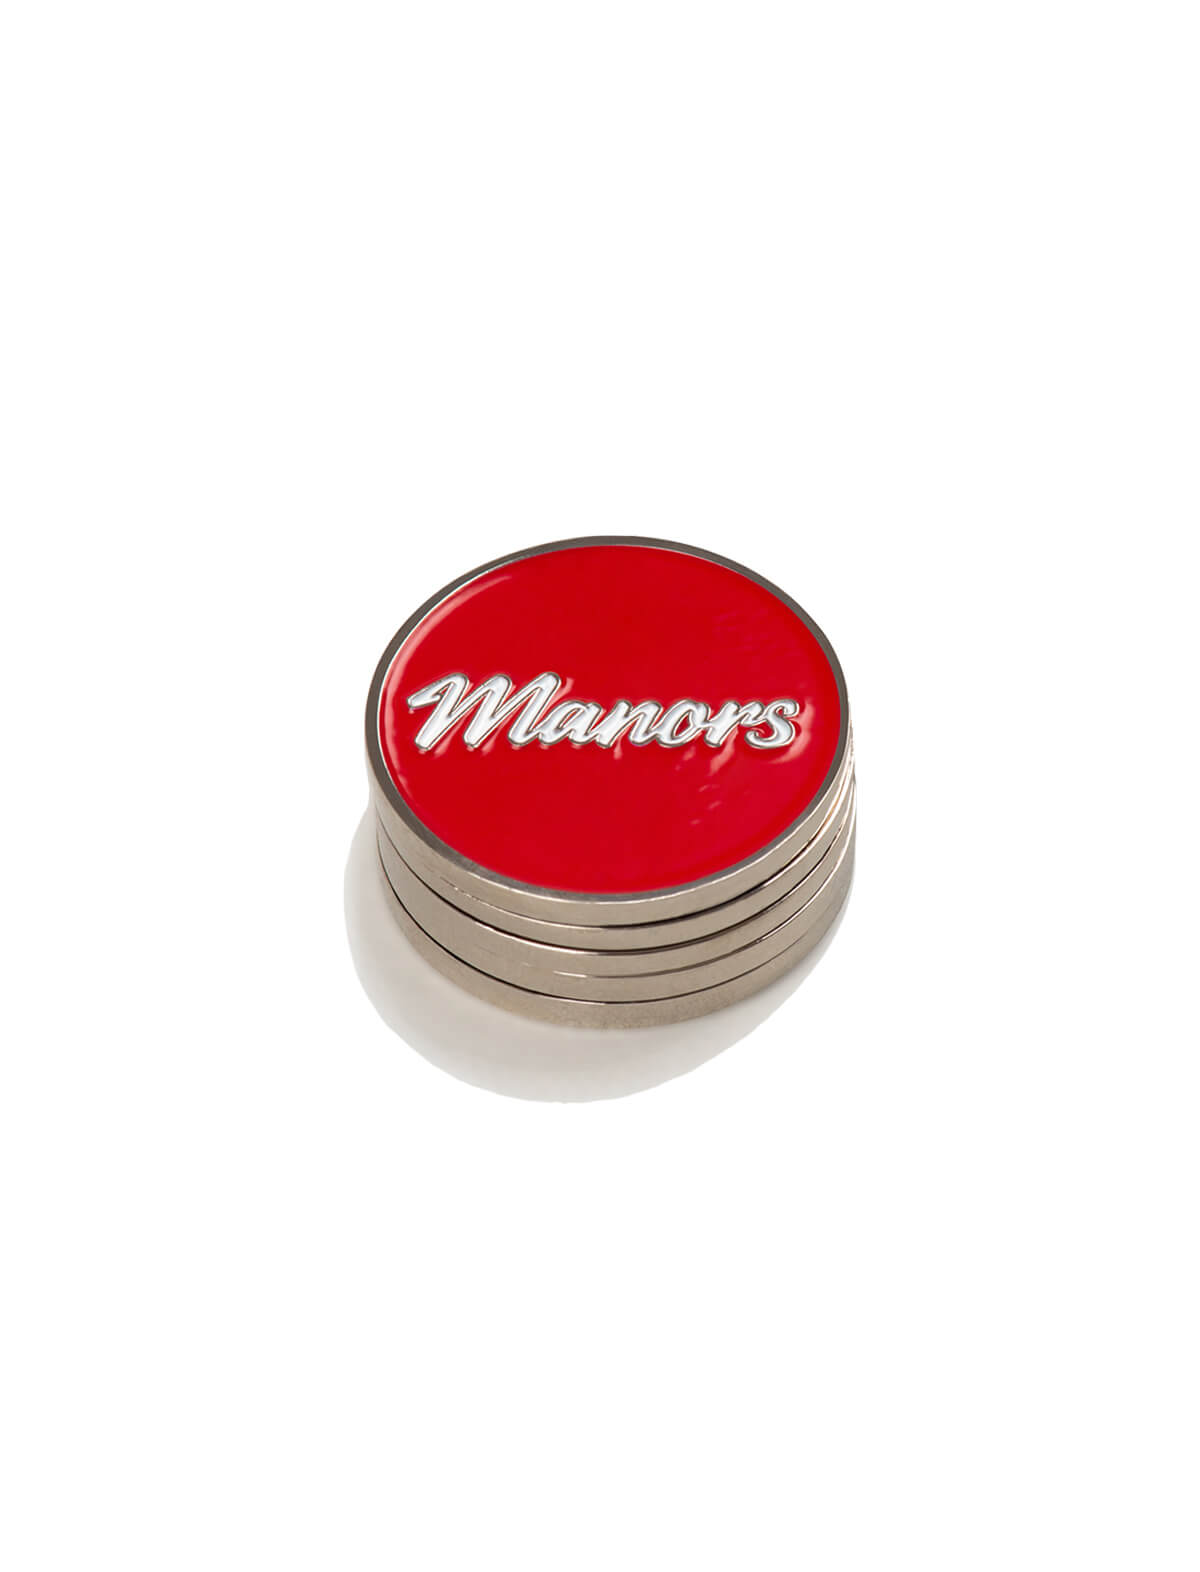 MANORS GOLF Classic Manors Ball Marker in Sliver/Red